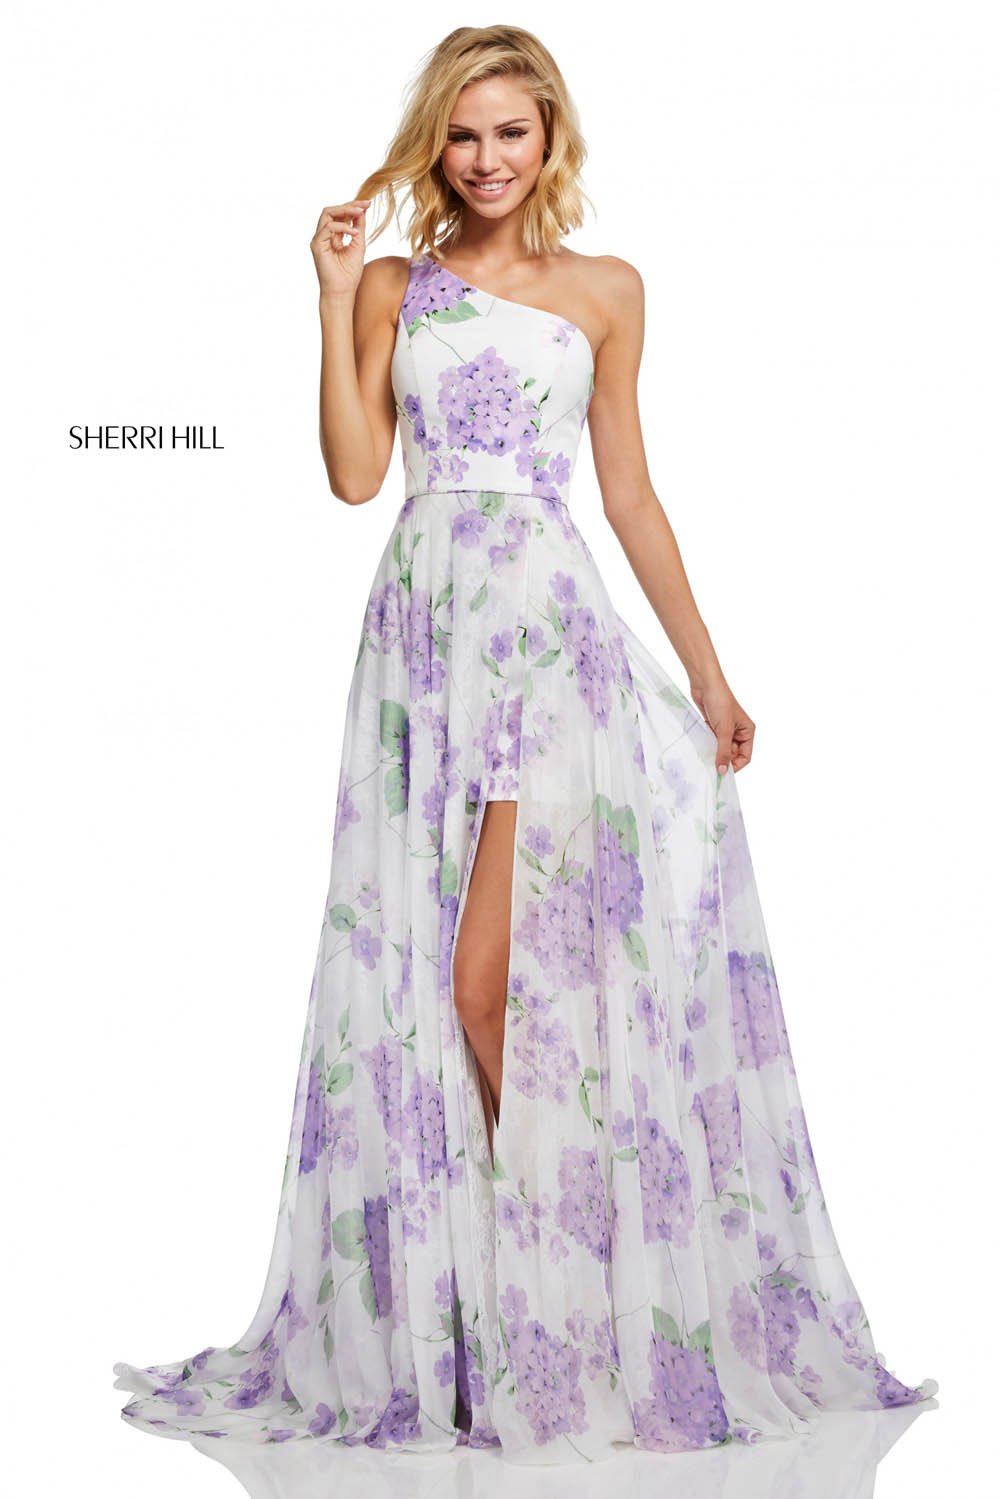 Sherri Hill 52727 dress images in these colors: Ivory Lilac Print.